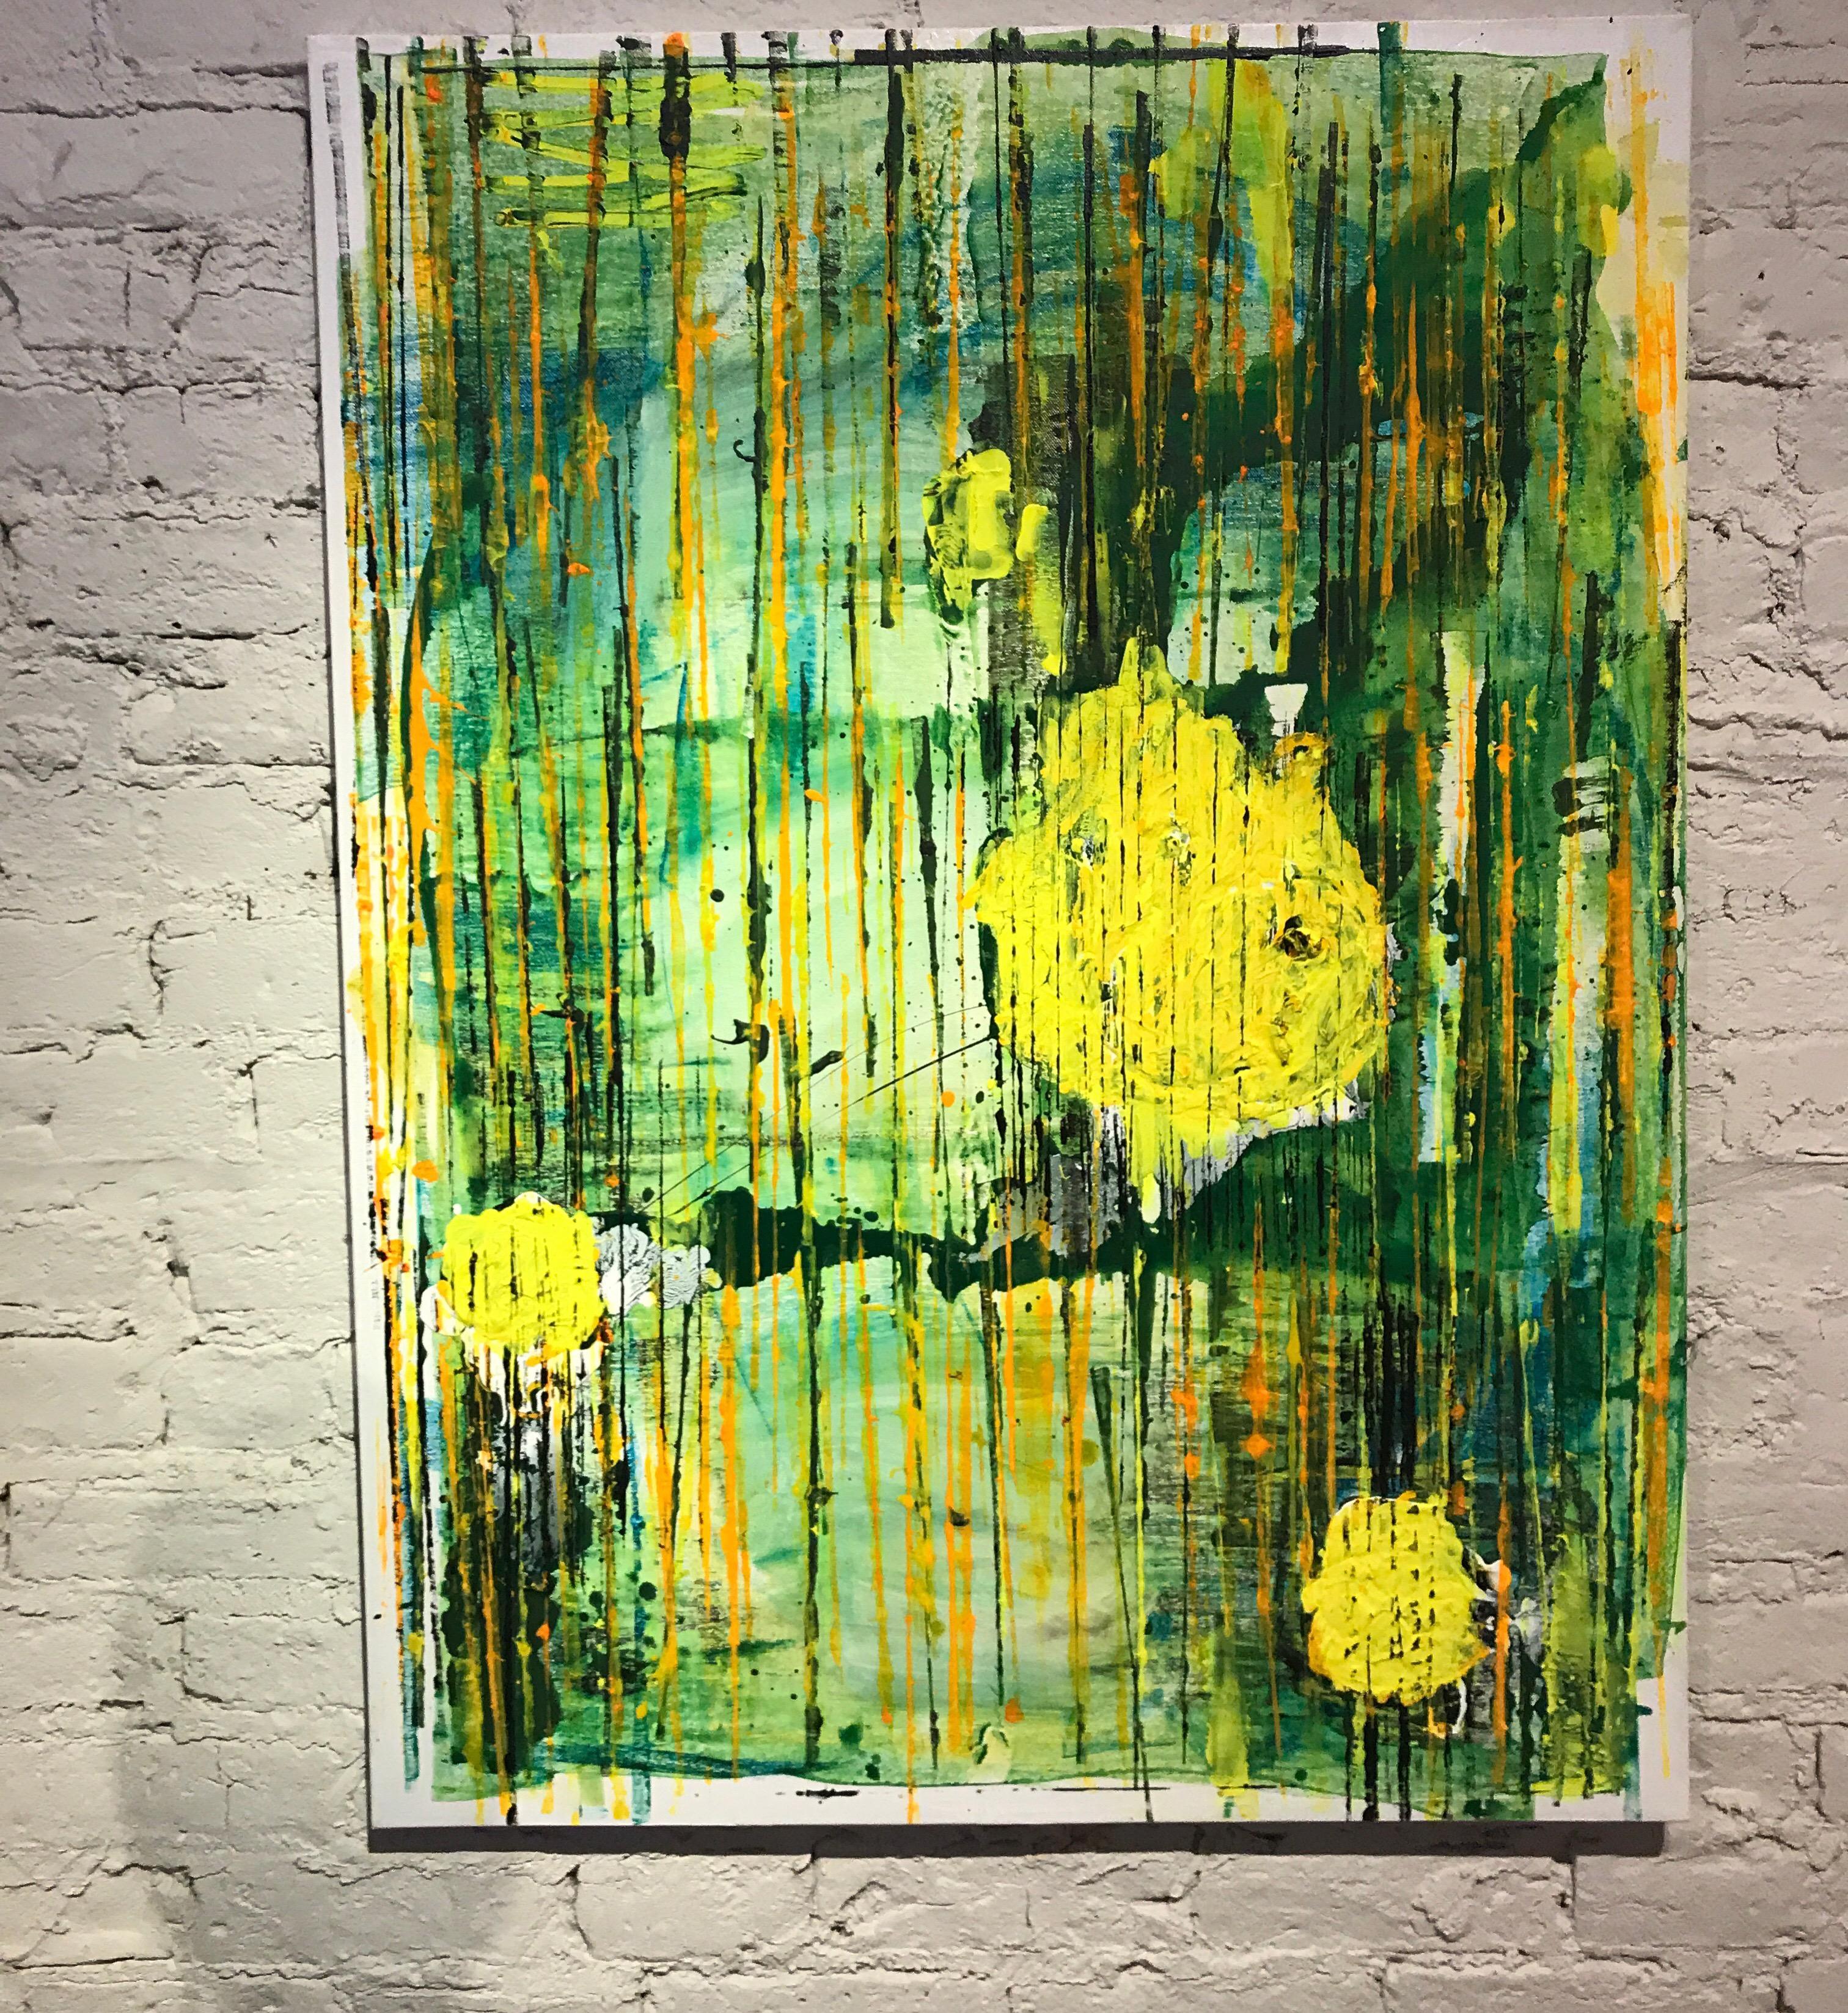 Bold yellow abstract modern painting by Chicago artist Jay Miller.
The work features heavy brushwork in vibrant colors.
May be hung horizontally or vertically.